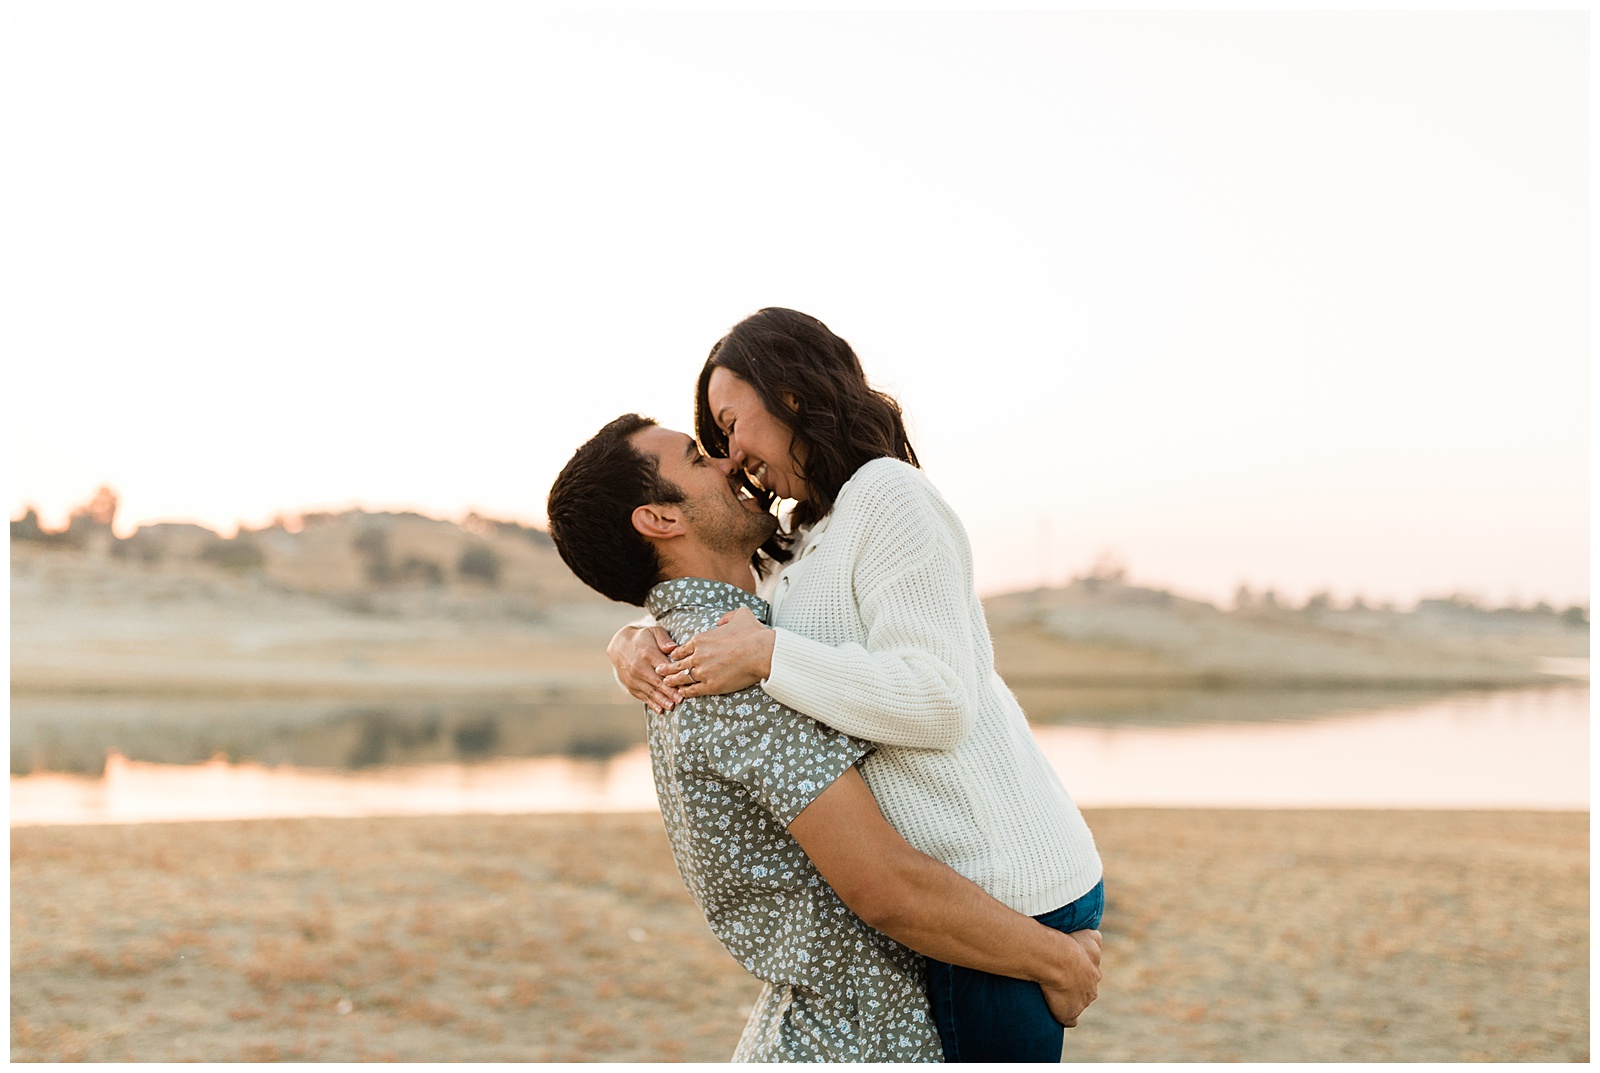 couple kissing by the lake at sunset during an engagement shoot at millerton lake